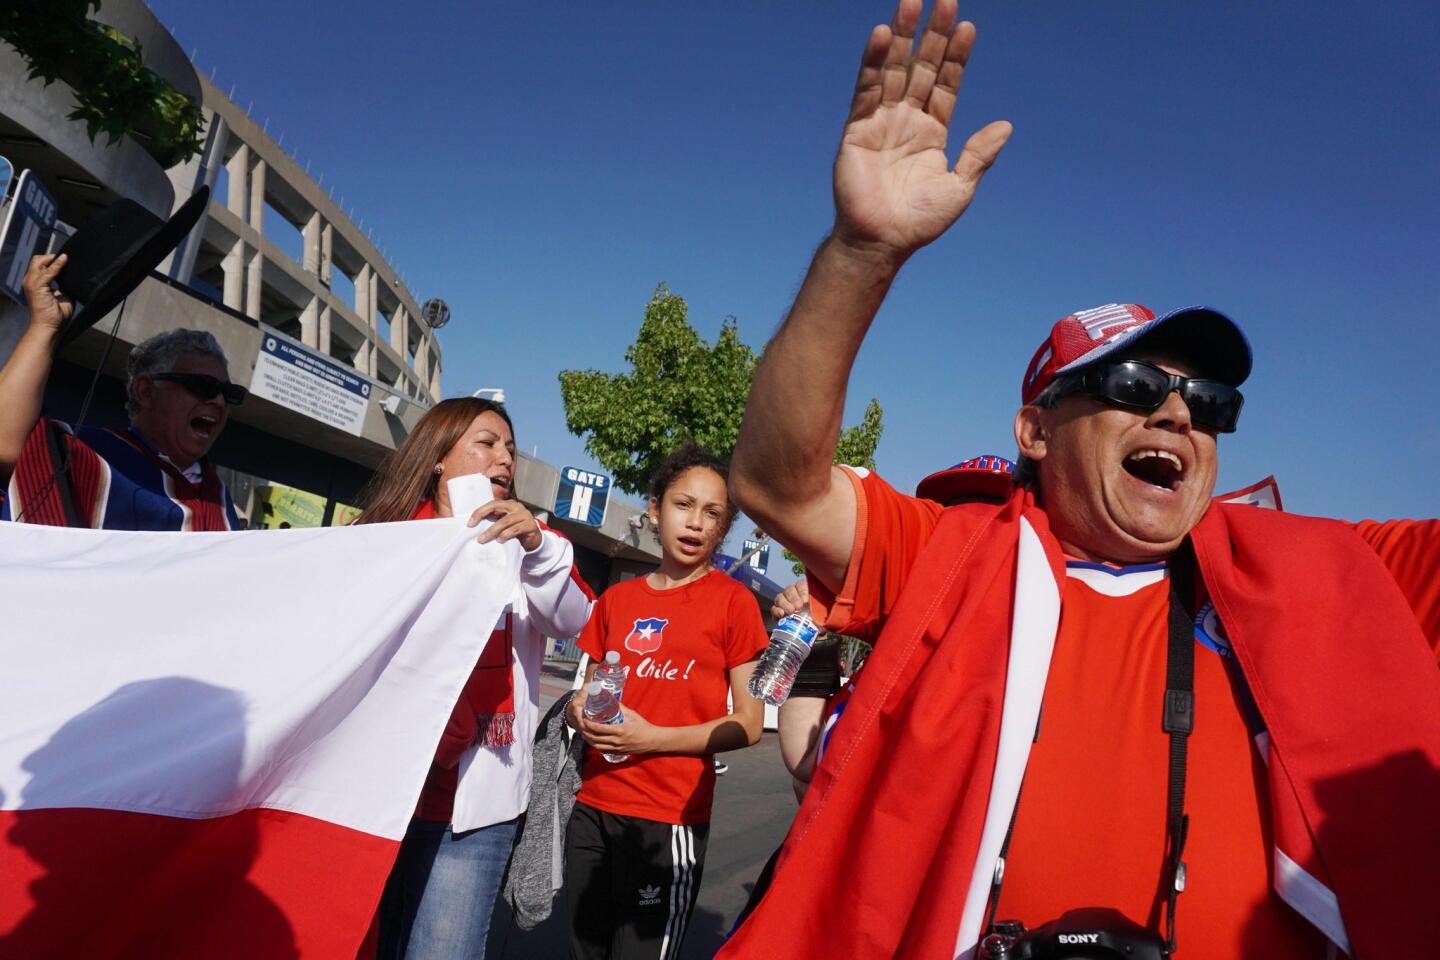 Fans of team Chile cheer before the start of the Mexico vs Chile soccer match at Qualcomm Stadium in San Diego, California on Wednesday, June 1, 2016. / AFP PHOTO / Sandy HuffakerSANDY HUFFAKER/AFP/Getty Images ** OUTS - ELSENT, FPG, CM - OUTS * NM, PH, VA if sourced by CT, LA or MoD **